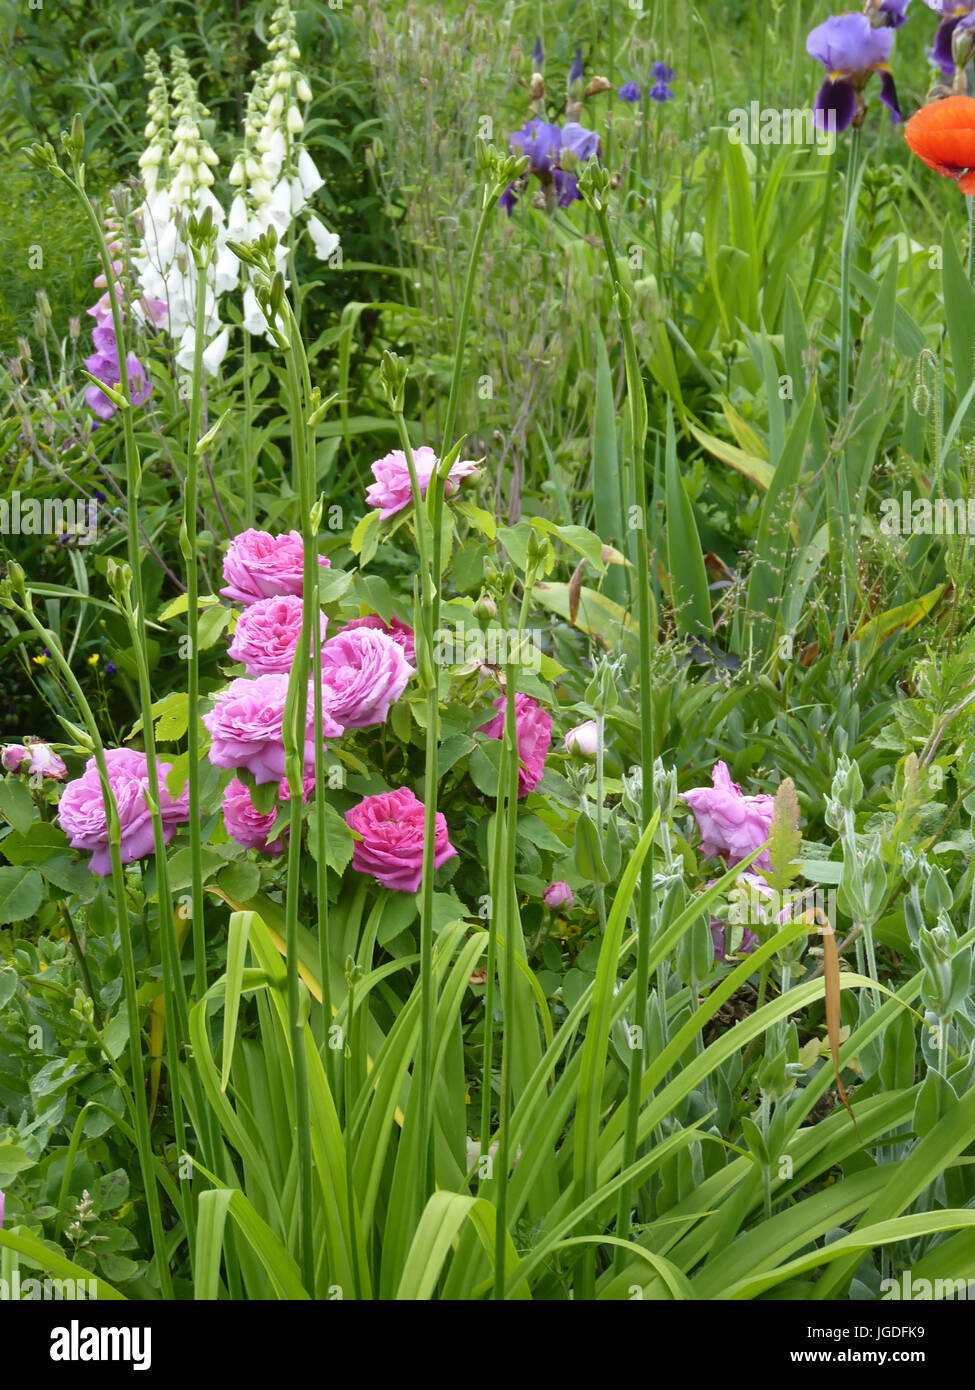 Flower garden with pink roses, iris and foxgloves Stock Photo